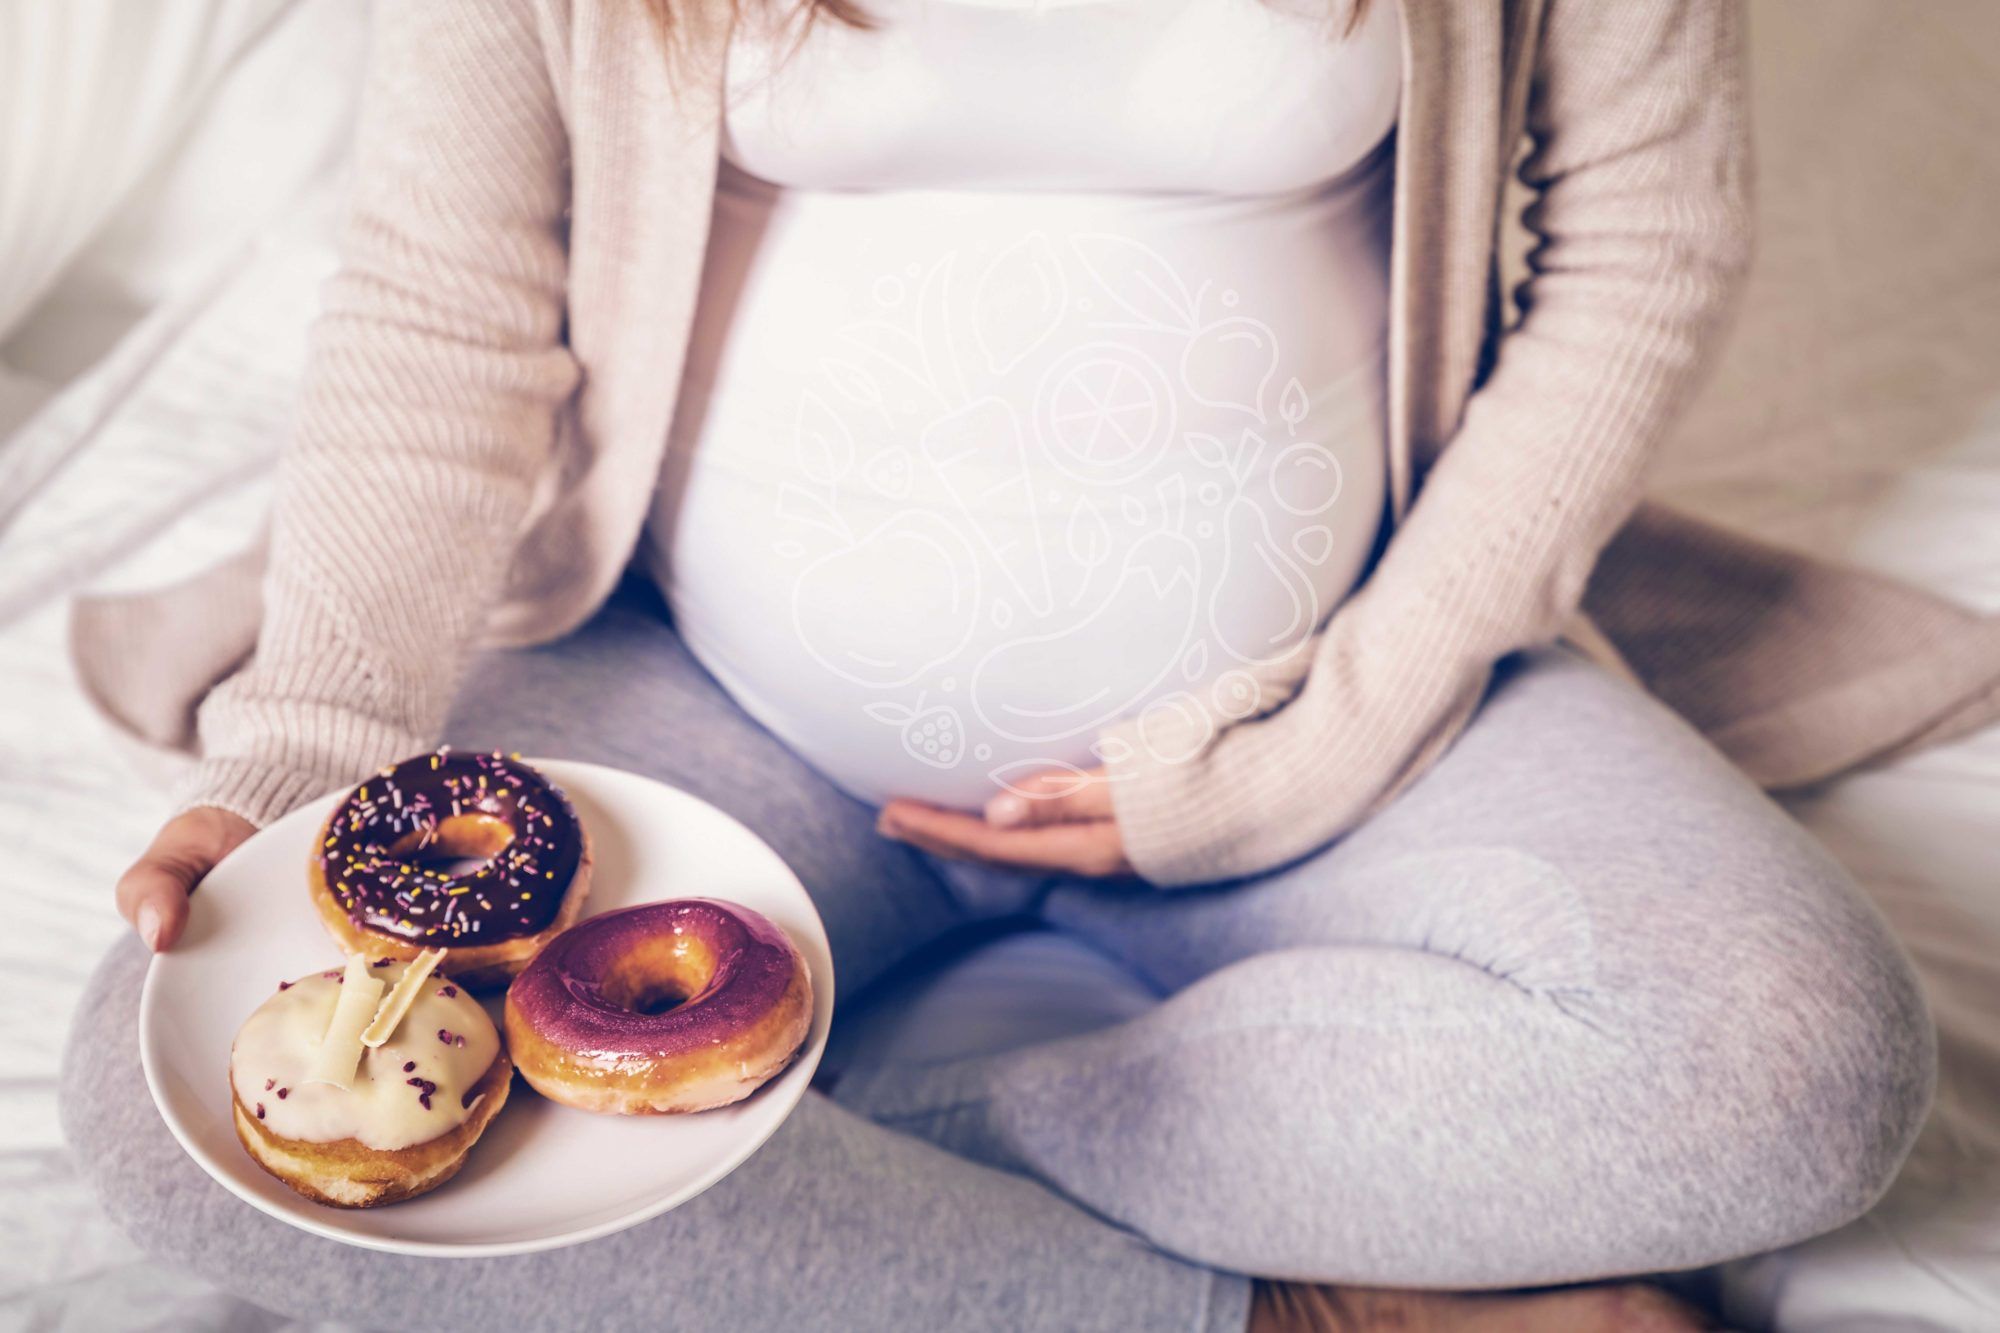 How to avoid gestational diabetes while pregnant